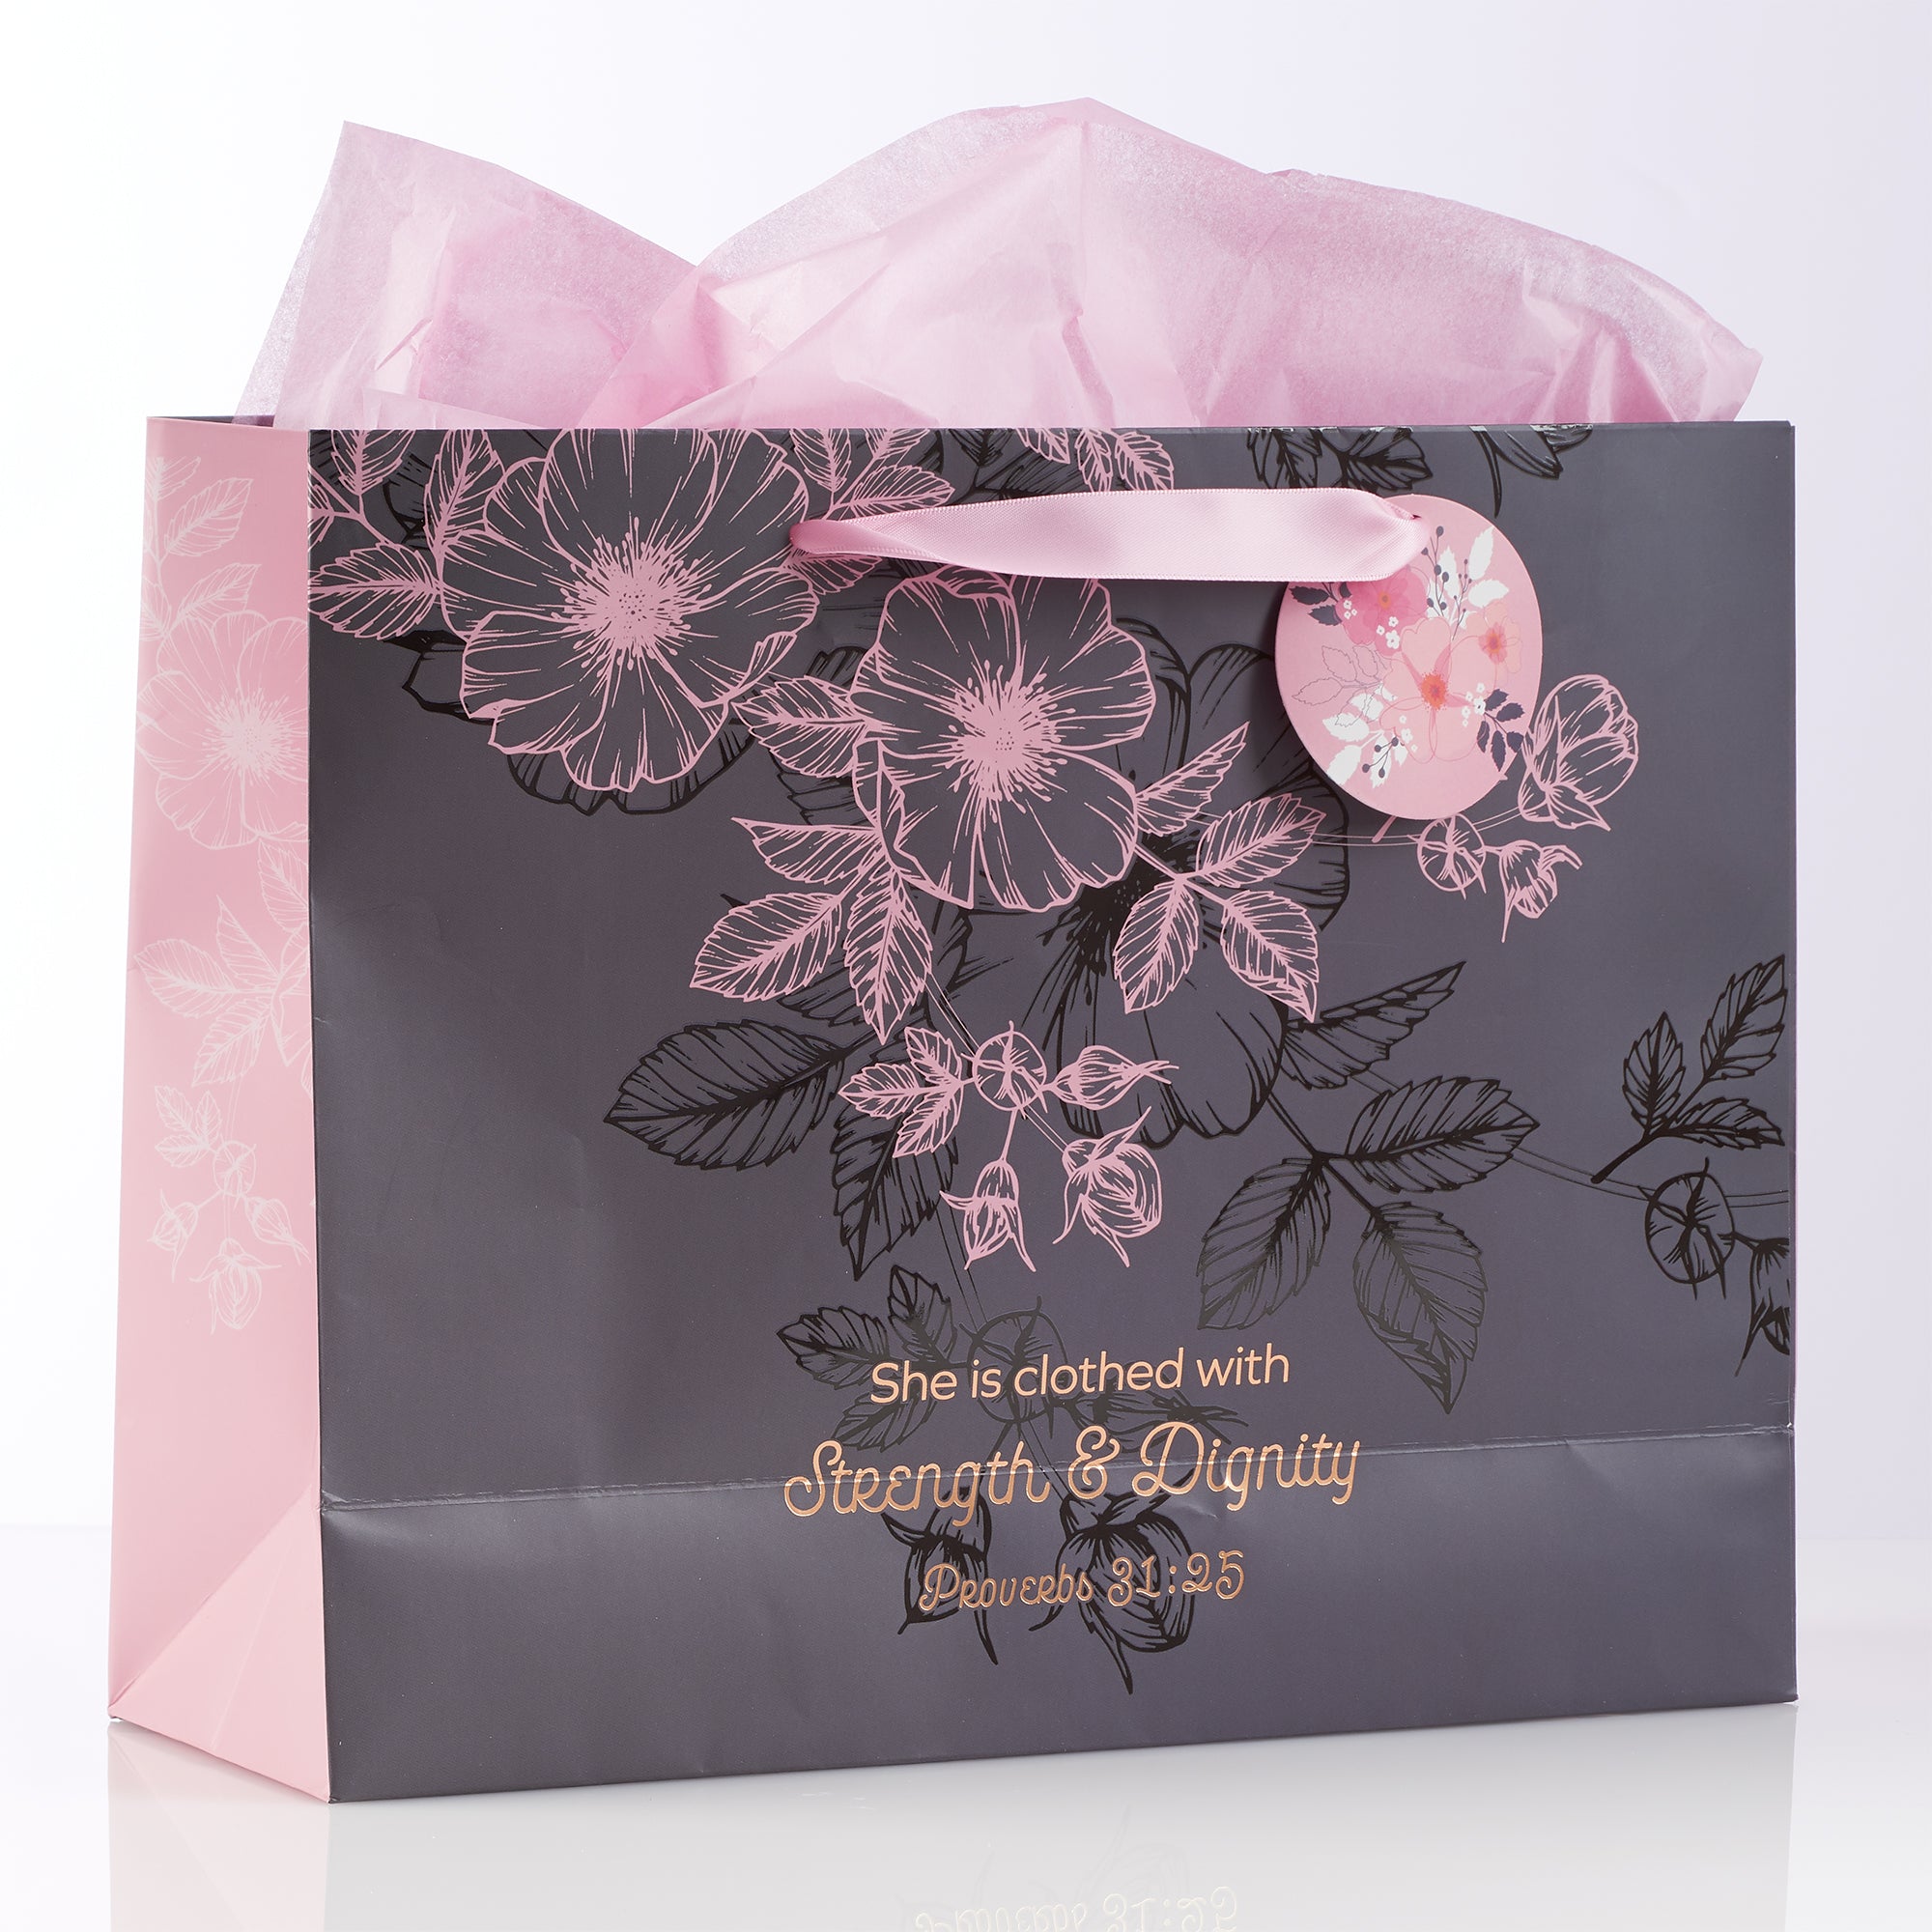 Image of Large Landscape Gift Bag: Strength and Dignity other